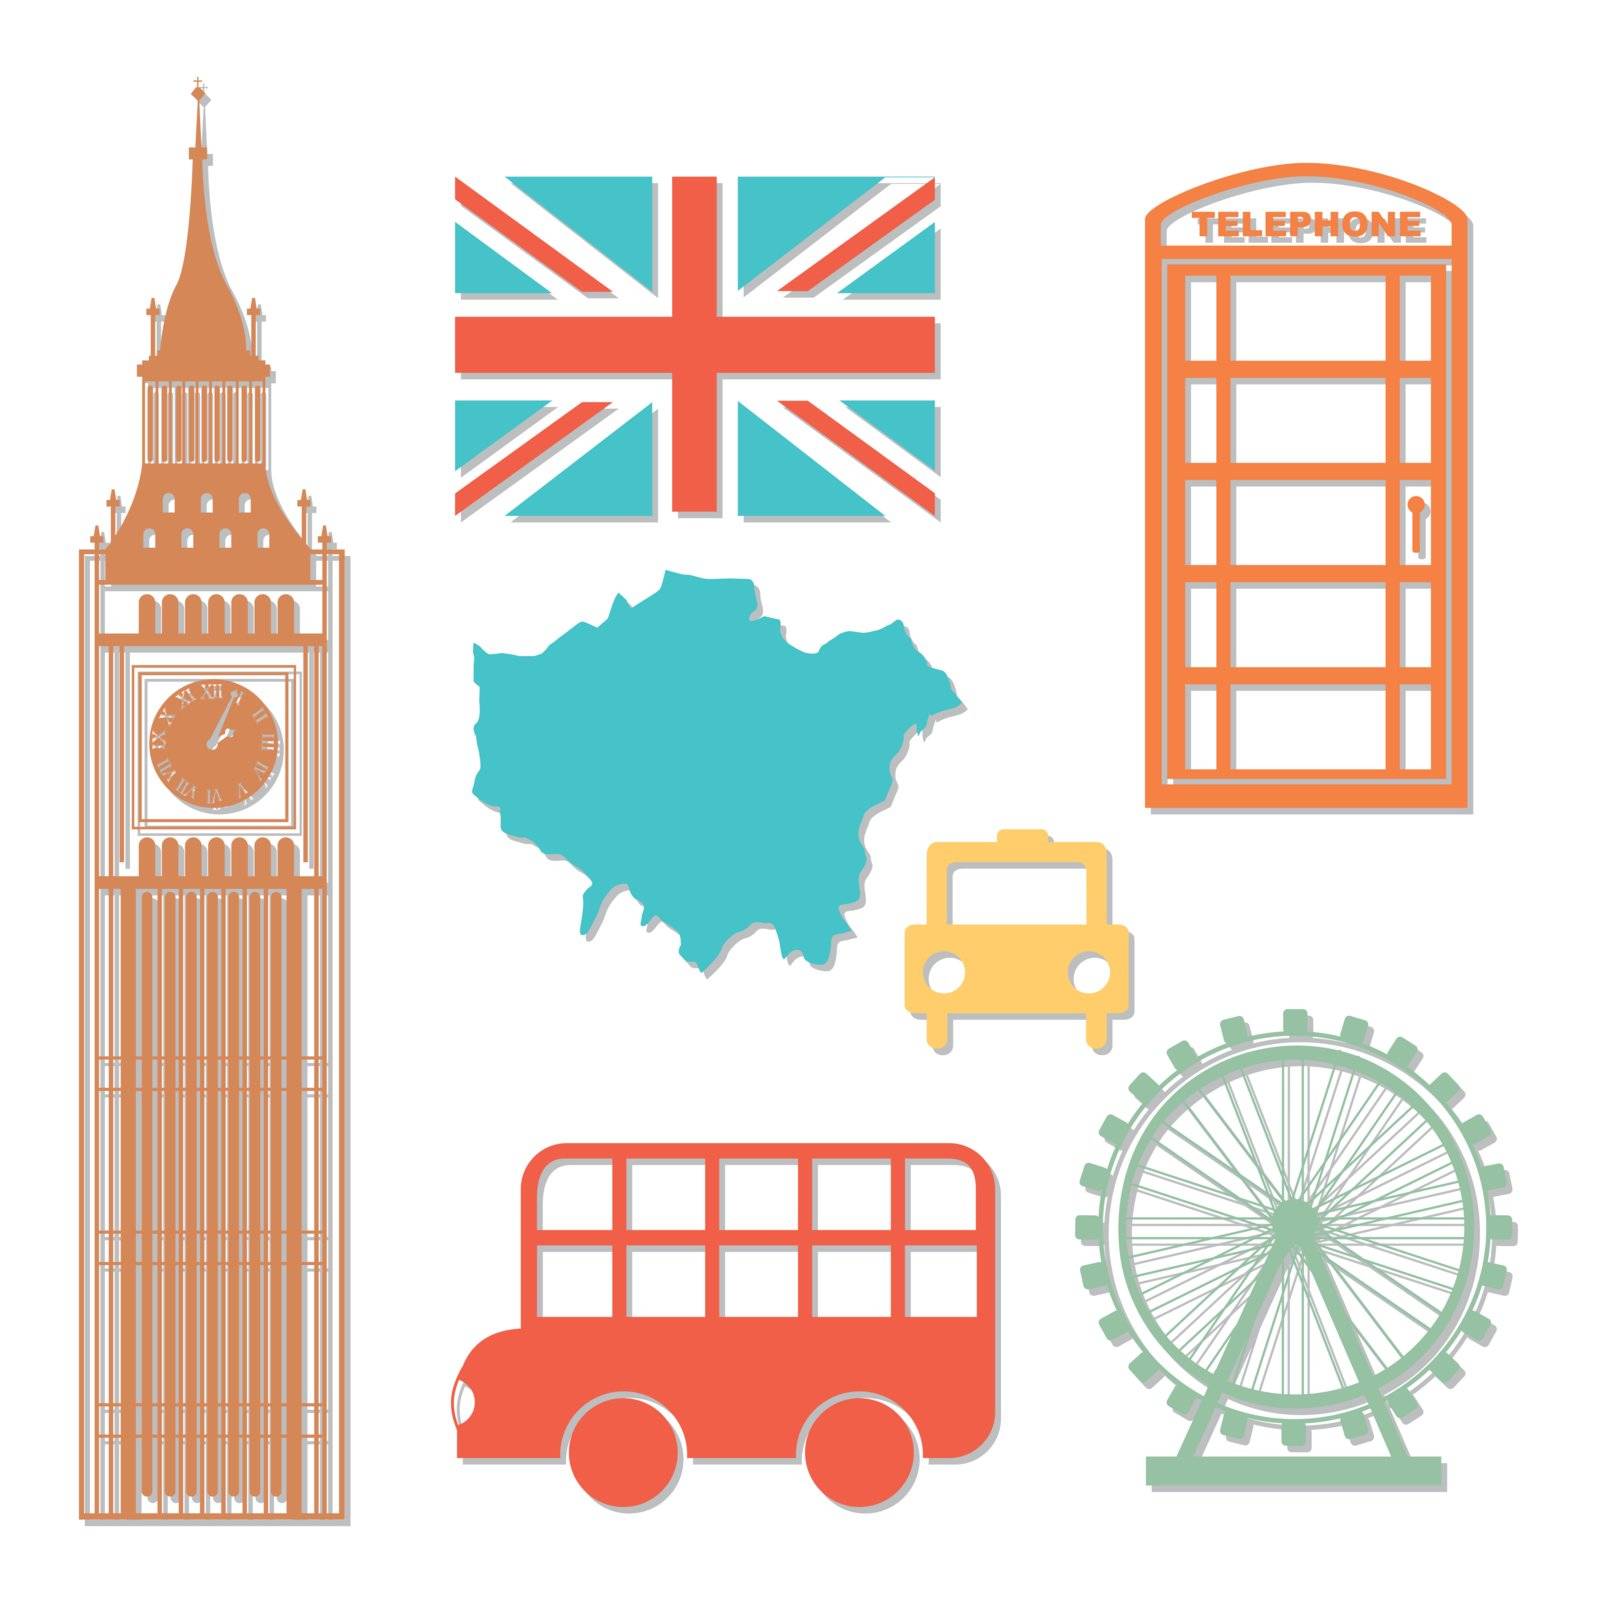 london elements over white background. vector illutration